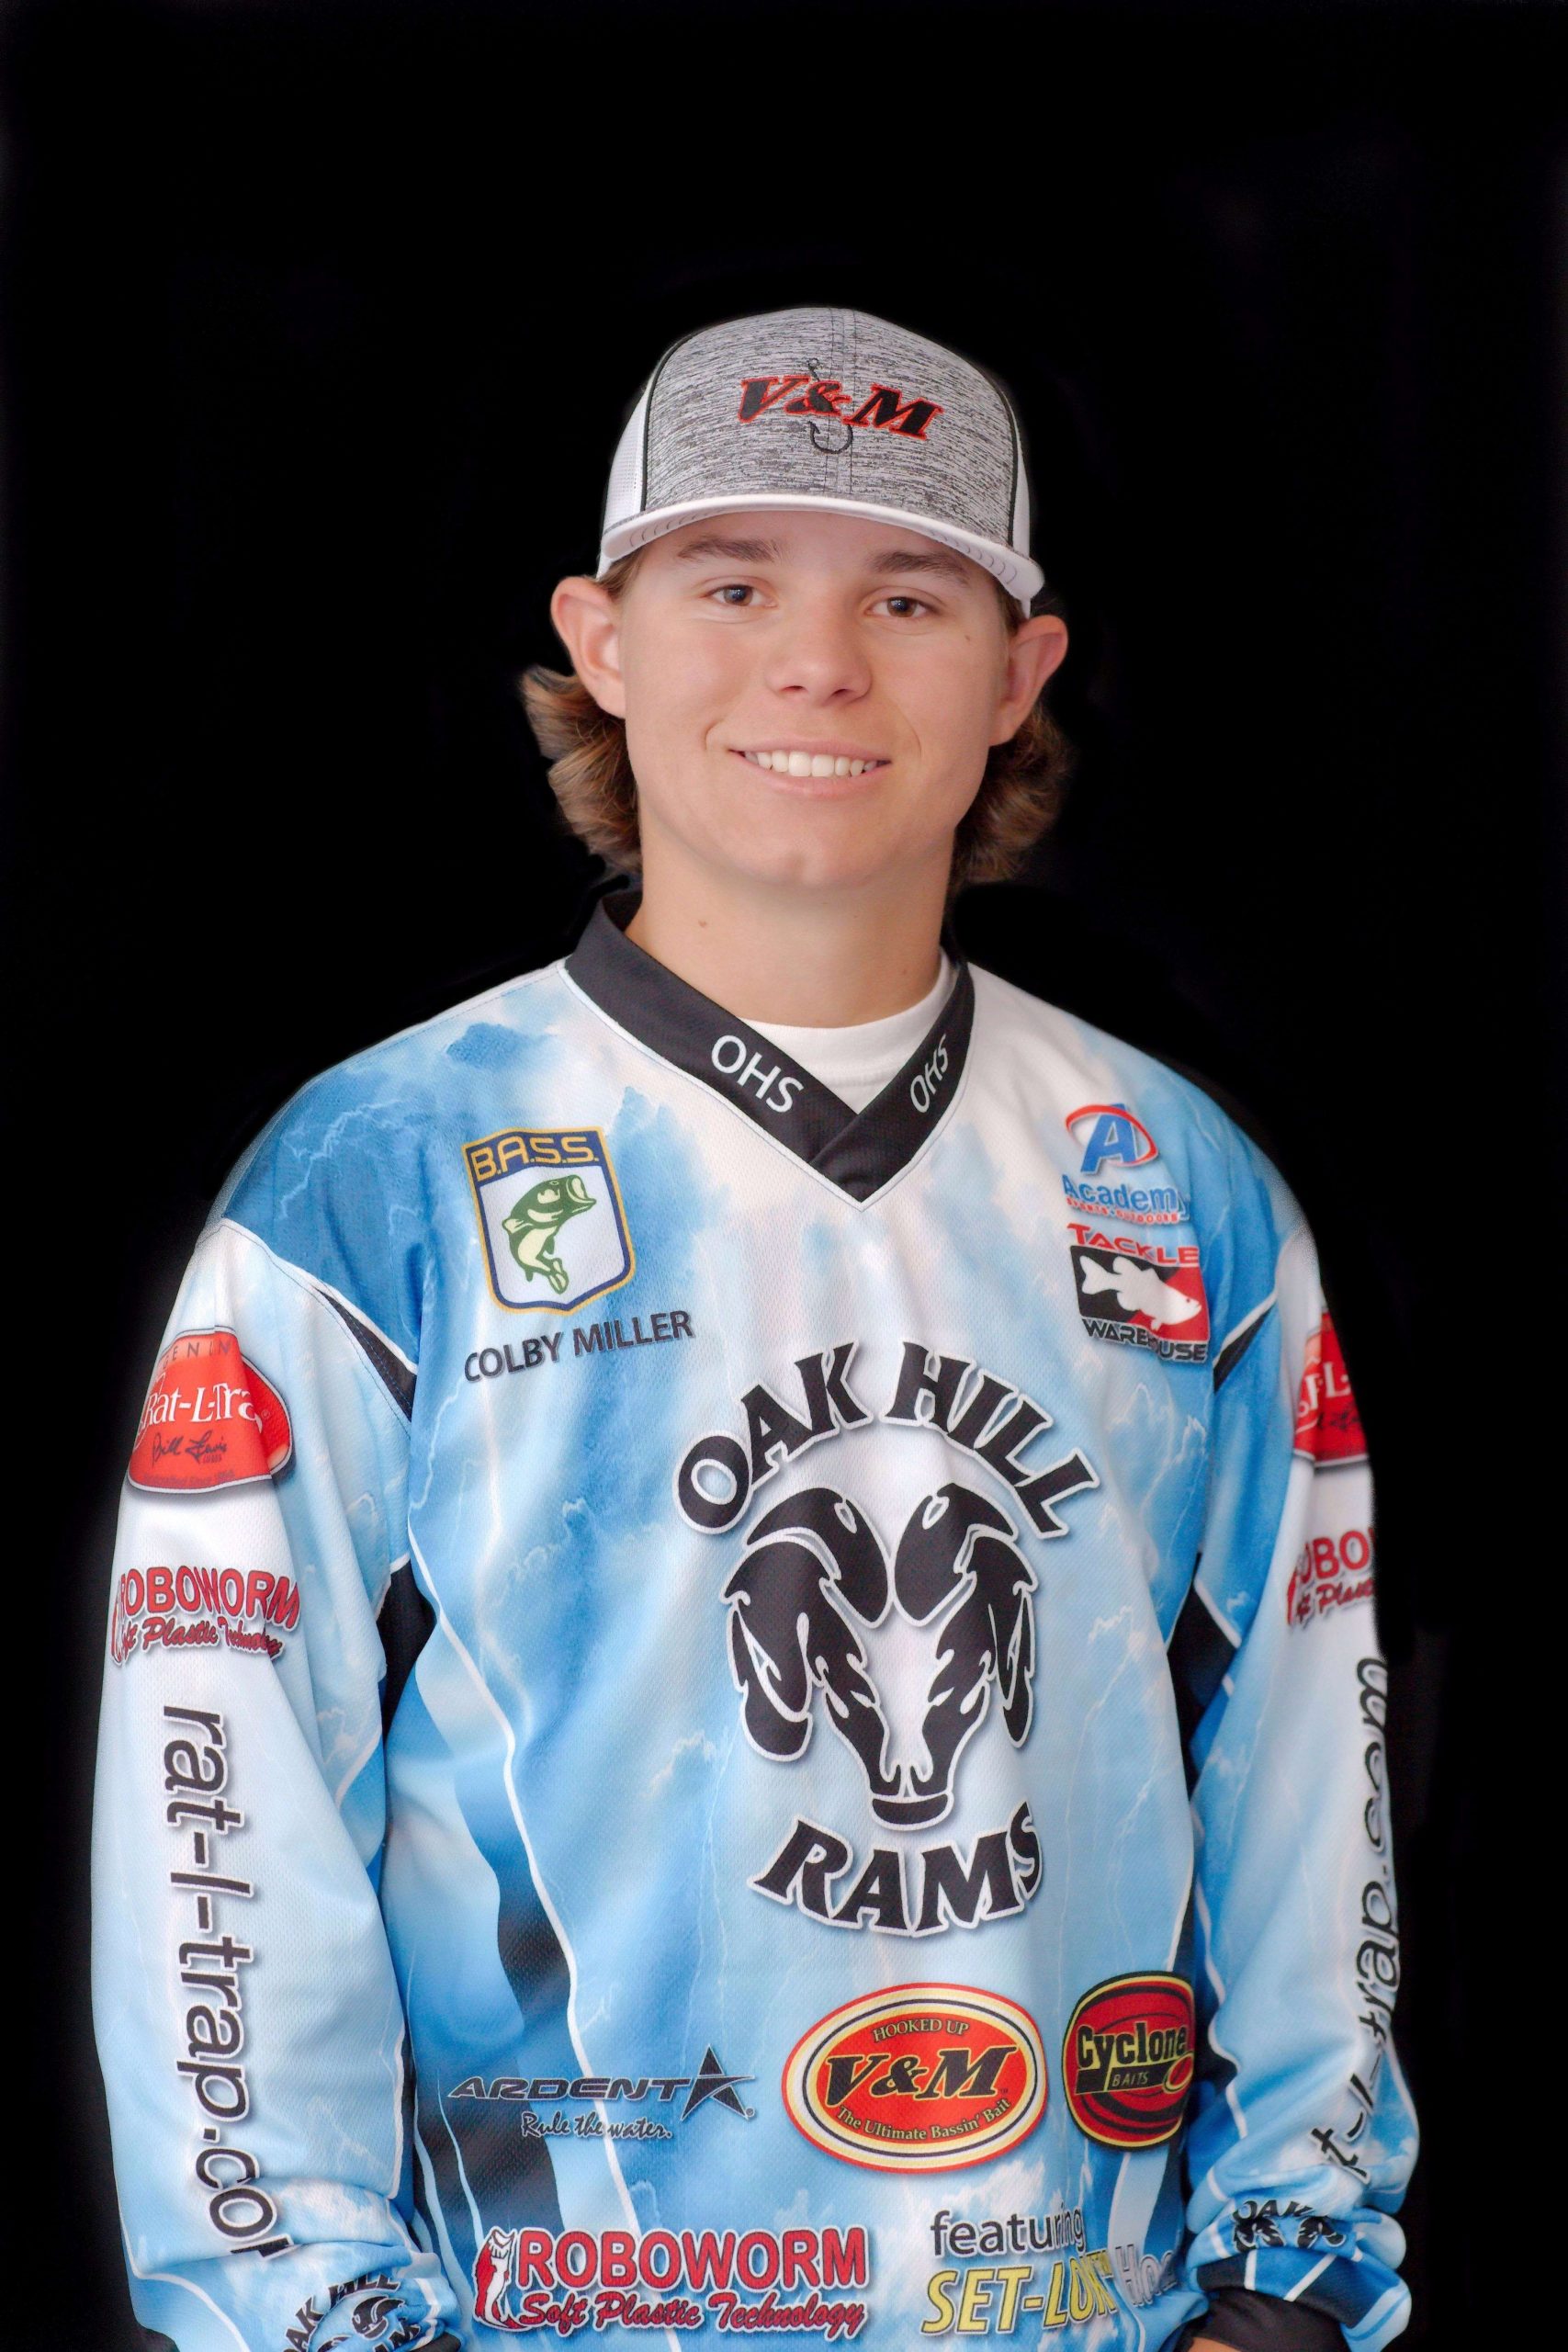 <b>Colby Miller, Elmer, La. </b><br>
A junior at Oak Hill High School, Miller has earned two wins in tournaments this year, including a 120 boat-field ALBC State Champion event and B.A.S.S. Nation State Championship on Toledo Bend. Miller also has three Top 5 finishes on his 2016-2017 resume. 
<p>

Miller frequently takes younger kids fishing in hopes they will carry on the sportfishing legacy, and he is an active member in High School of the Fellowship of Christian Athletes. 
<p>

âHe is one of the founding members of the Oak Hill High School Bass Club,â wrote Brandon Cedus, teacher and coach at Oak Hill High School. âHe has led his team to back-to-back Association of Louisiana Bass Clubs High School State Championships and is currently seeking his third.â
